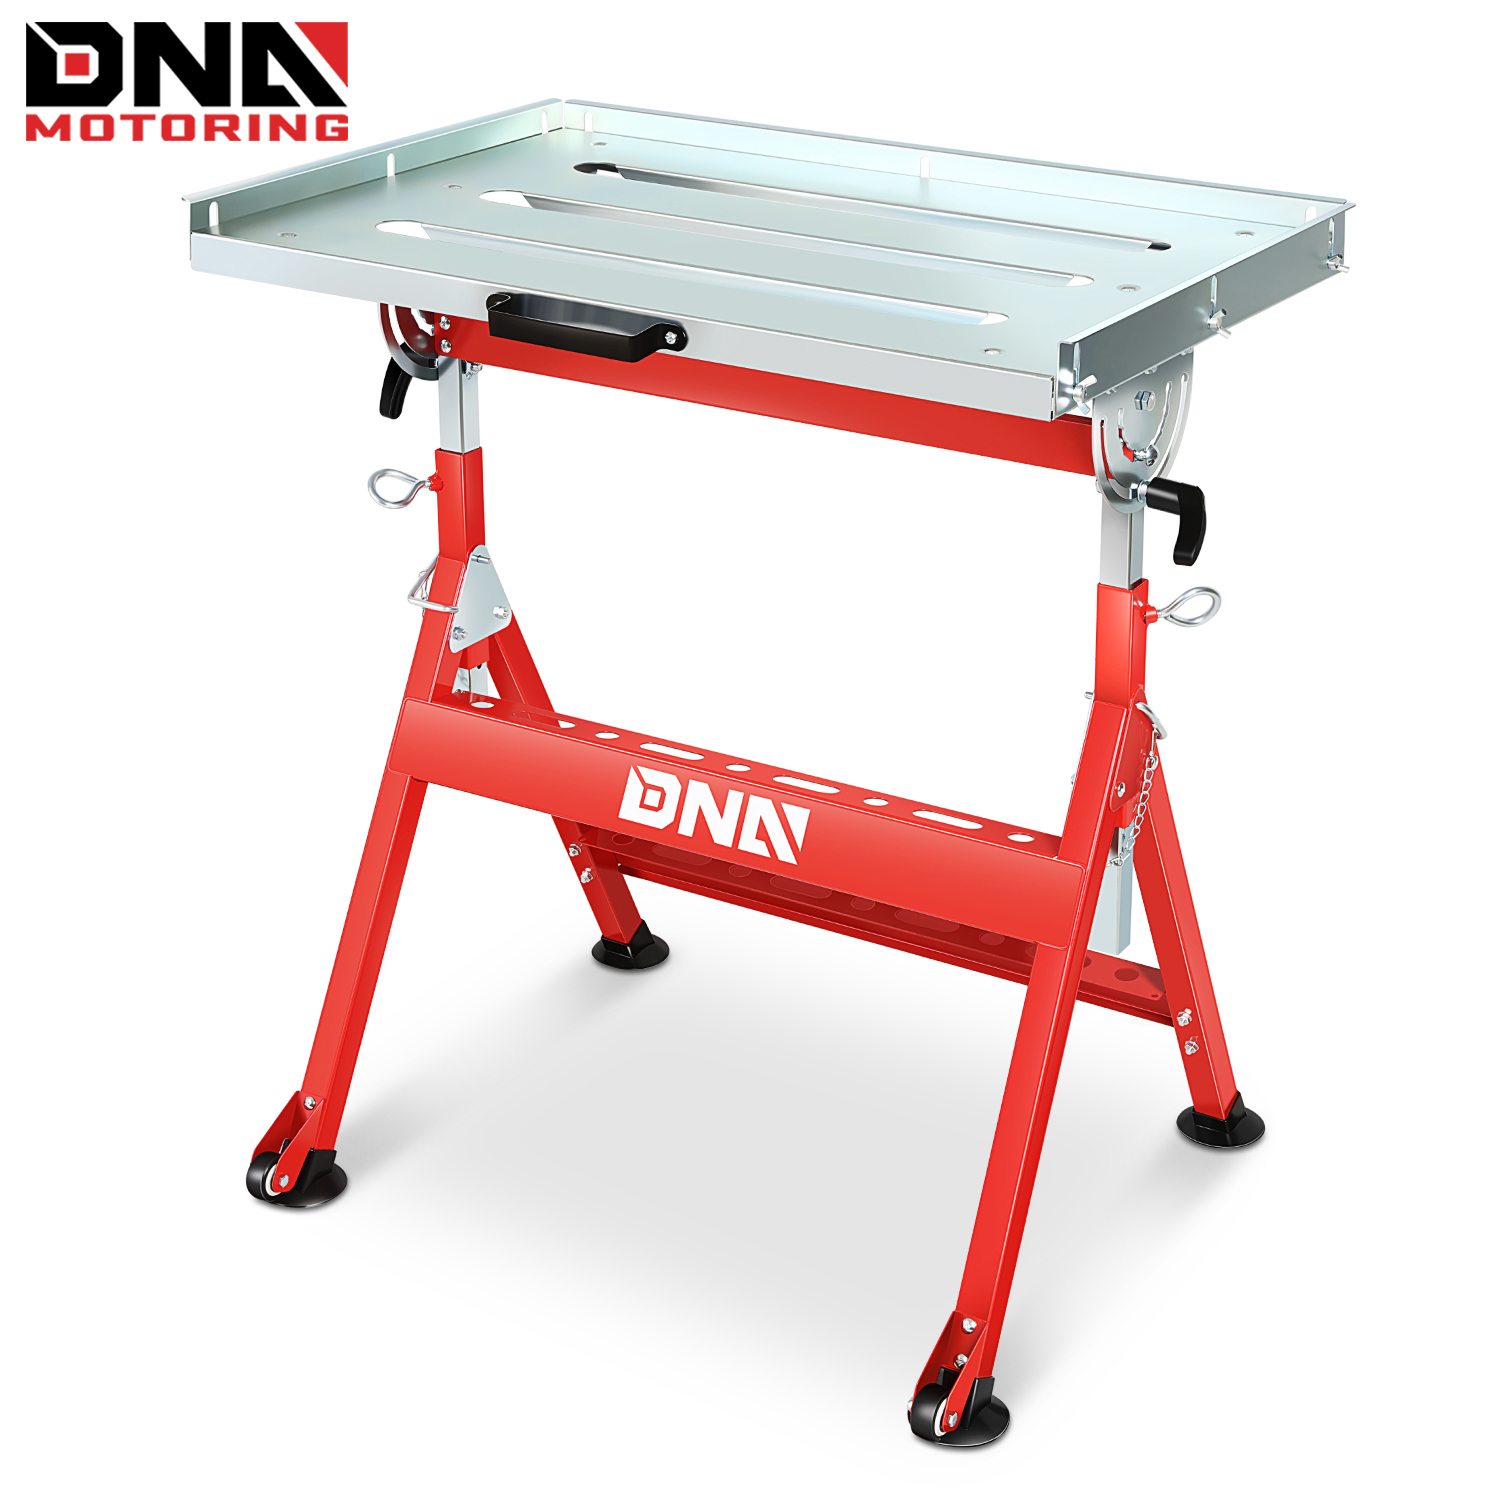 

Carbon Steel Welding Table 30'' X 20'' 400 Lbs Loading Capacity, Adjustable Angle & Height, Portable Workbench With 2 Fixed Wheels